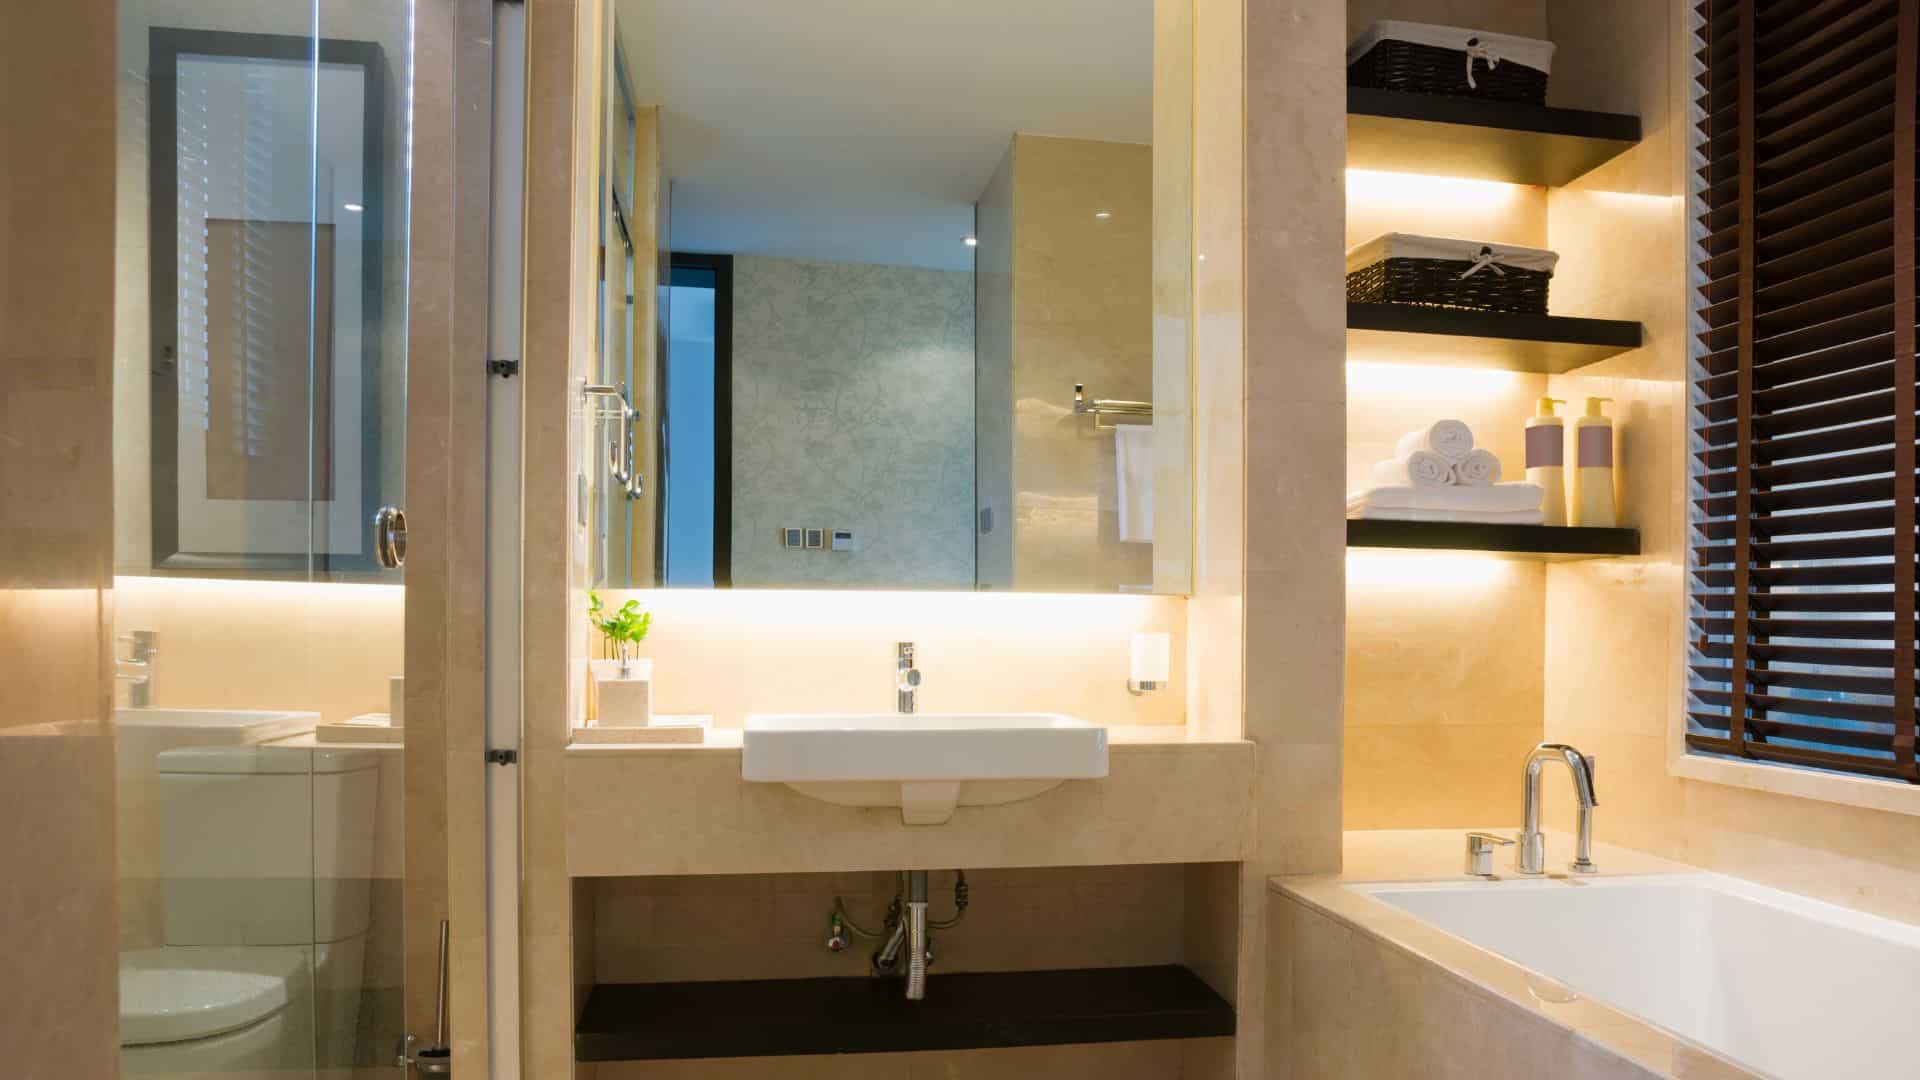 Bathroom style with tub and vanity